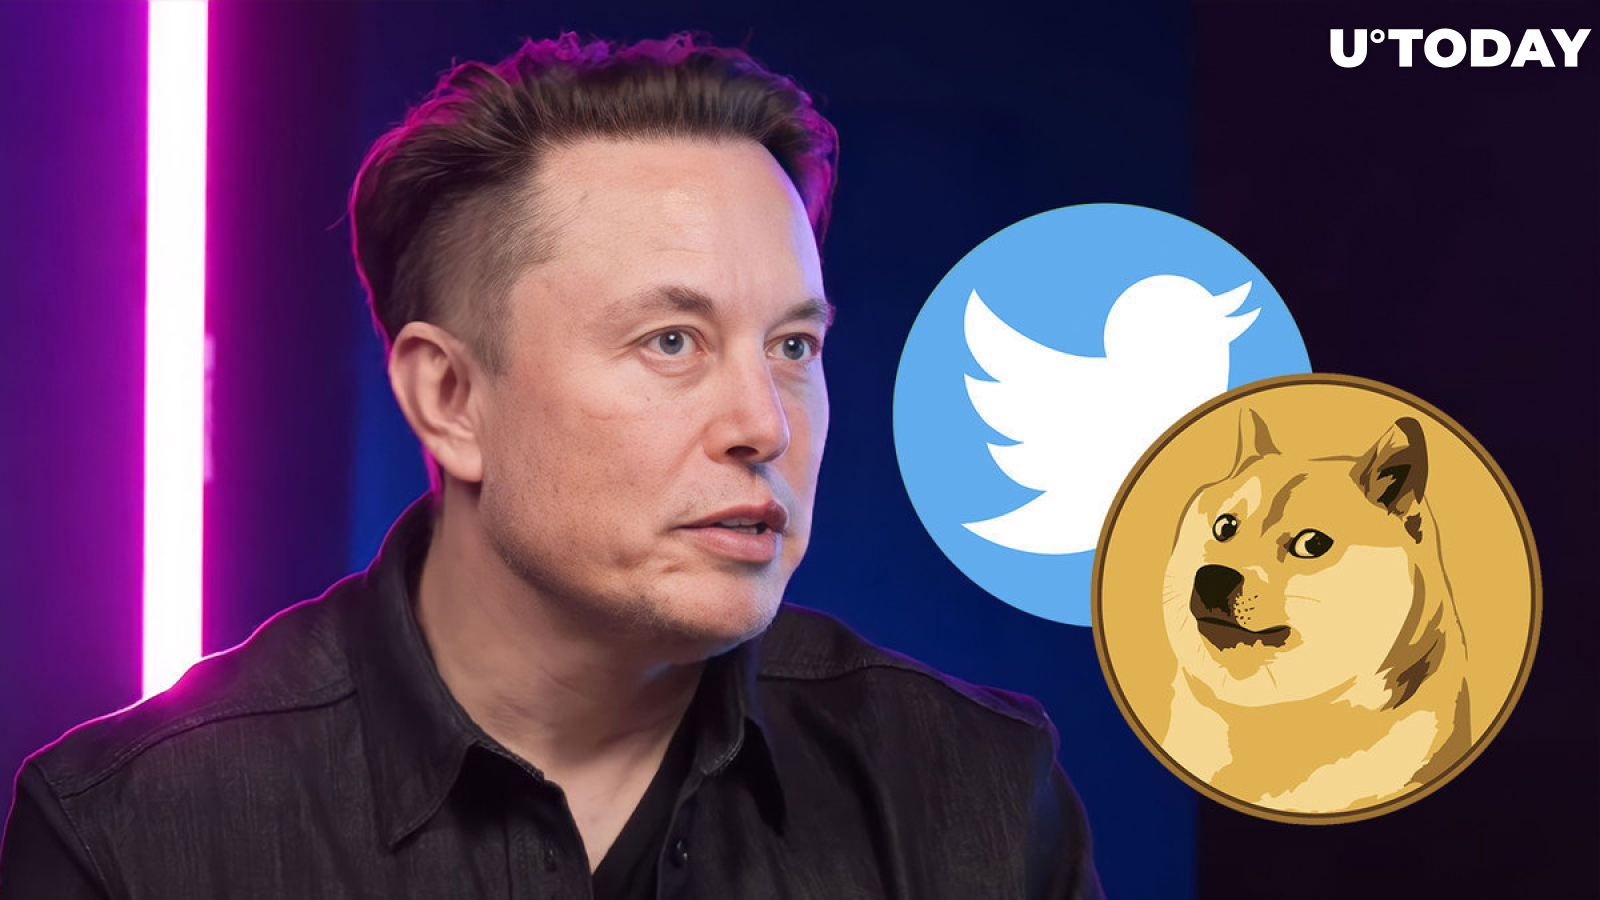 DOGE Price up 4% as Elon Musk Mentions Dogecoin in Provocative Tweet